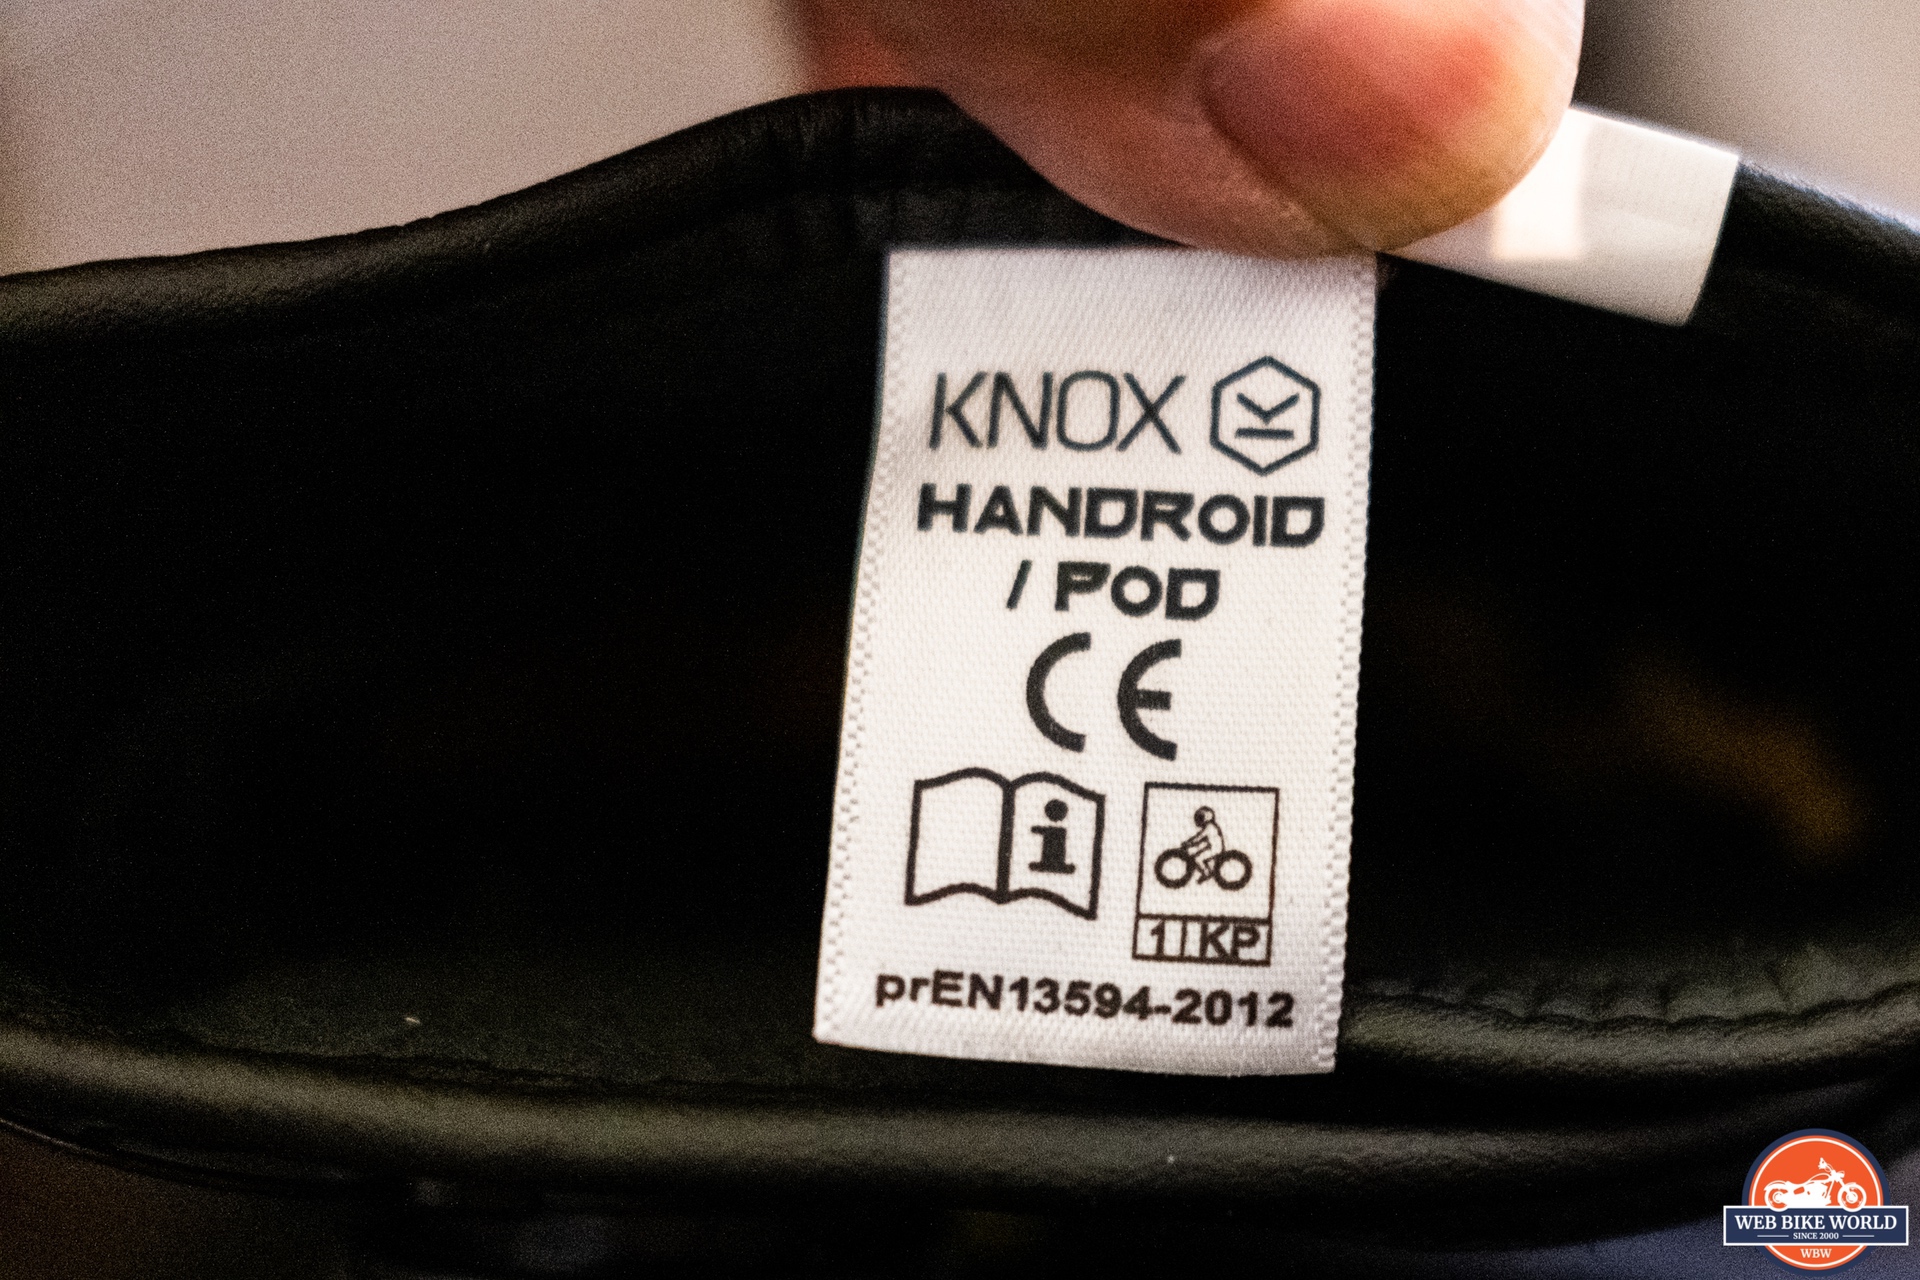 CE label approval for Knox Handroid Pod Mark IV Gloves